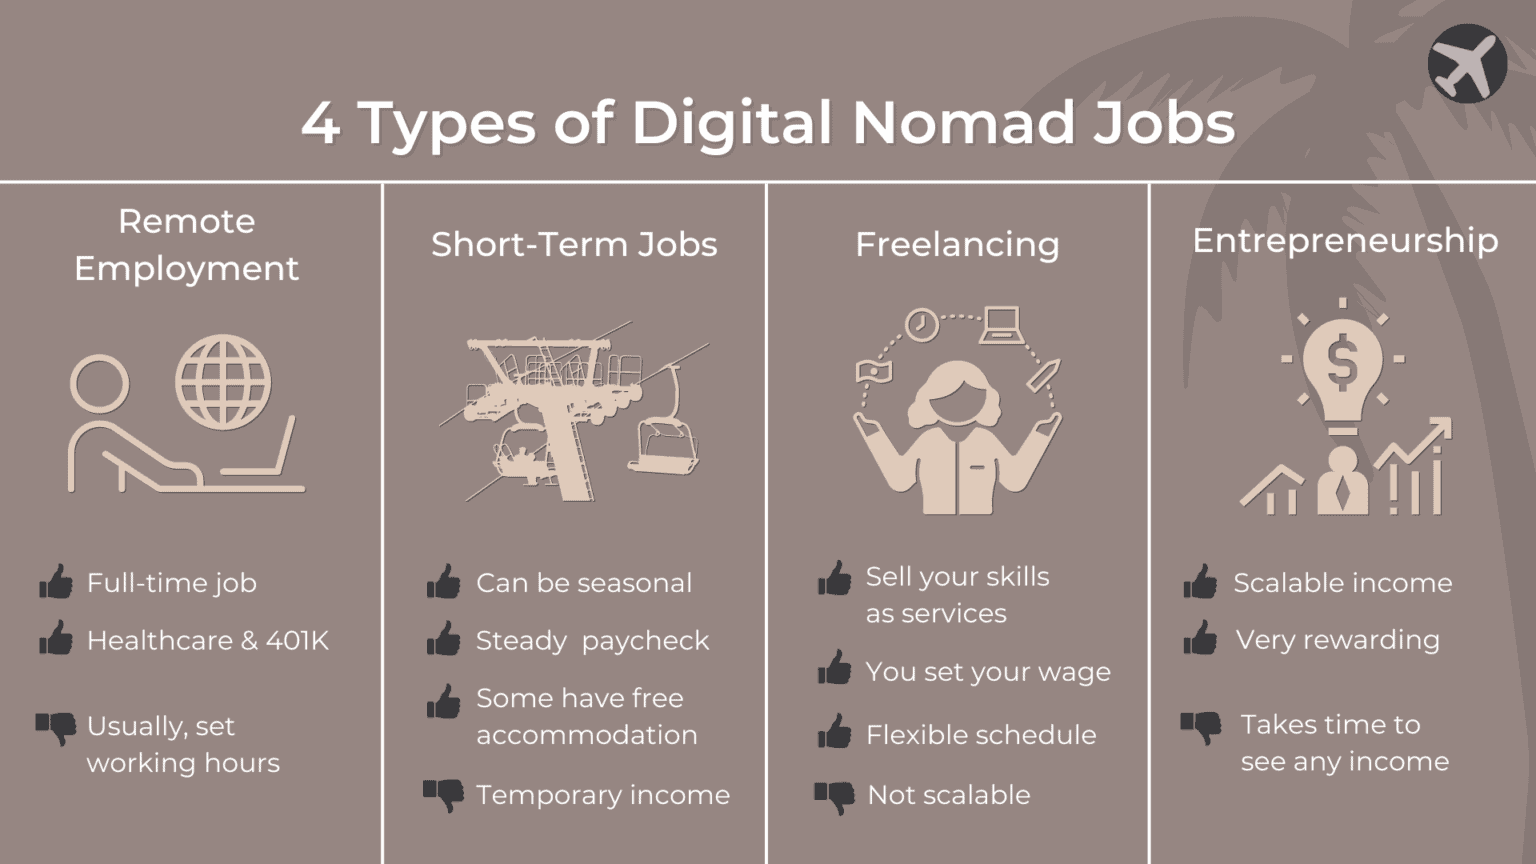 Original graphic showing columns for the 4 types of digital nomad jobs: remote employment, short-term jobs, freelancing, and entrepreneurship.